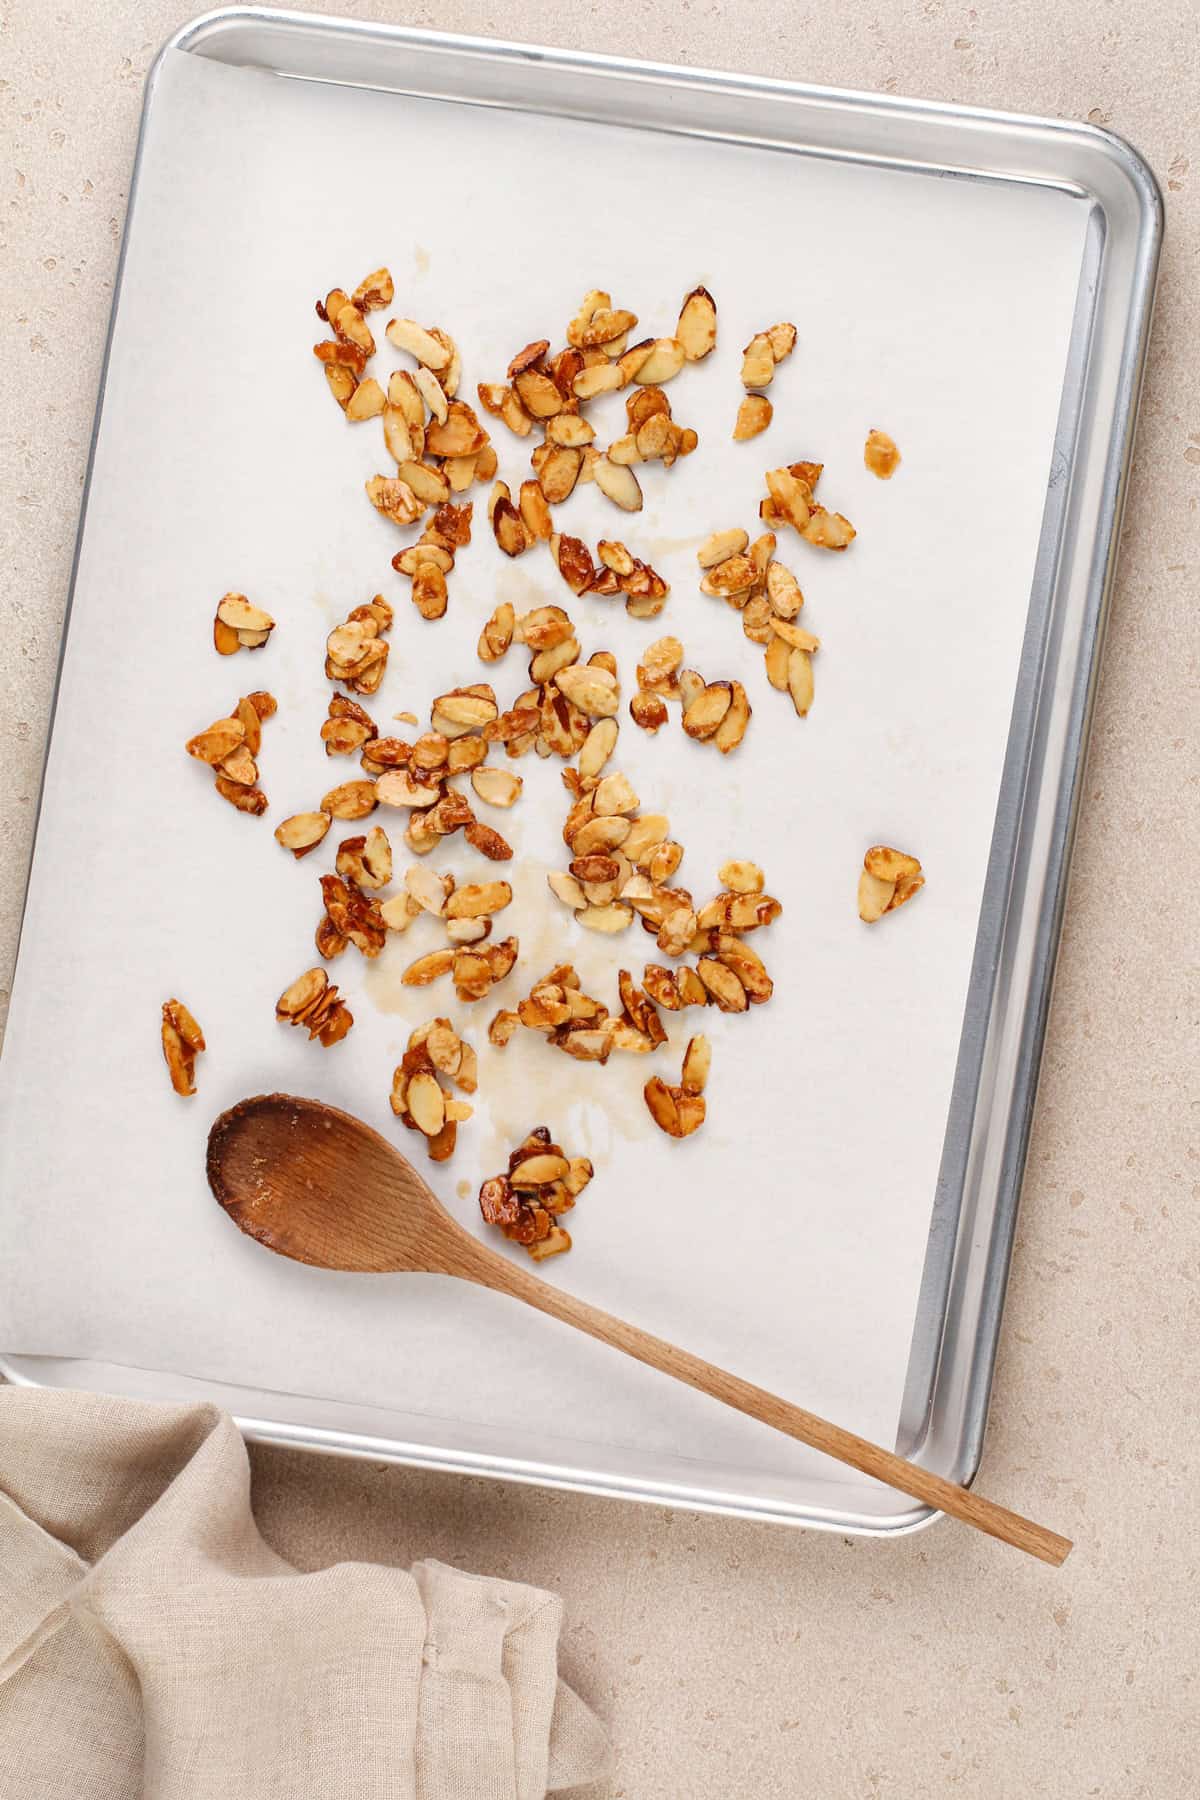 Caramelized almonds cooling on a parchment-lined baking sheet.